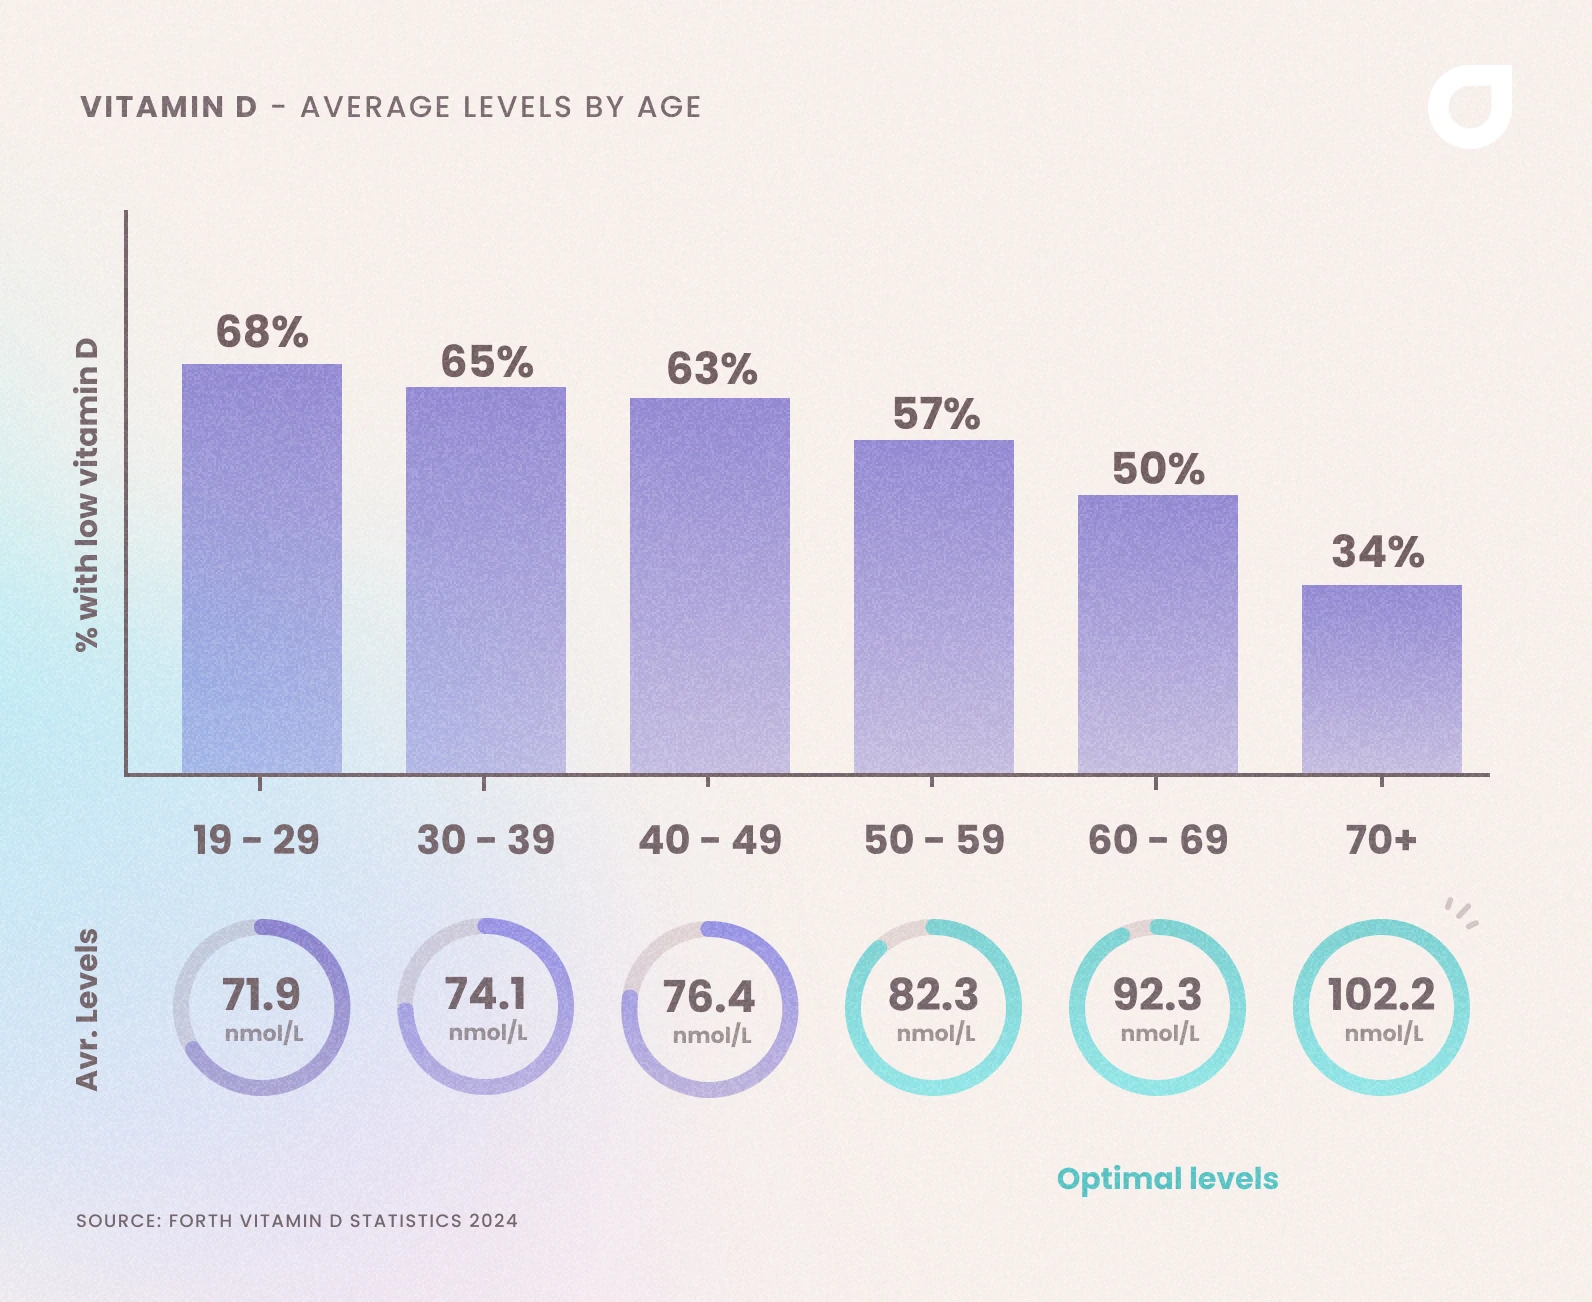 A graphic showing the percentage of people in each age bracket that had low vitamin D levels, along with the average level for each age group